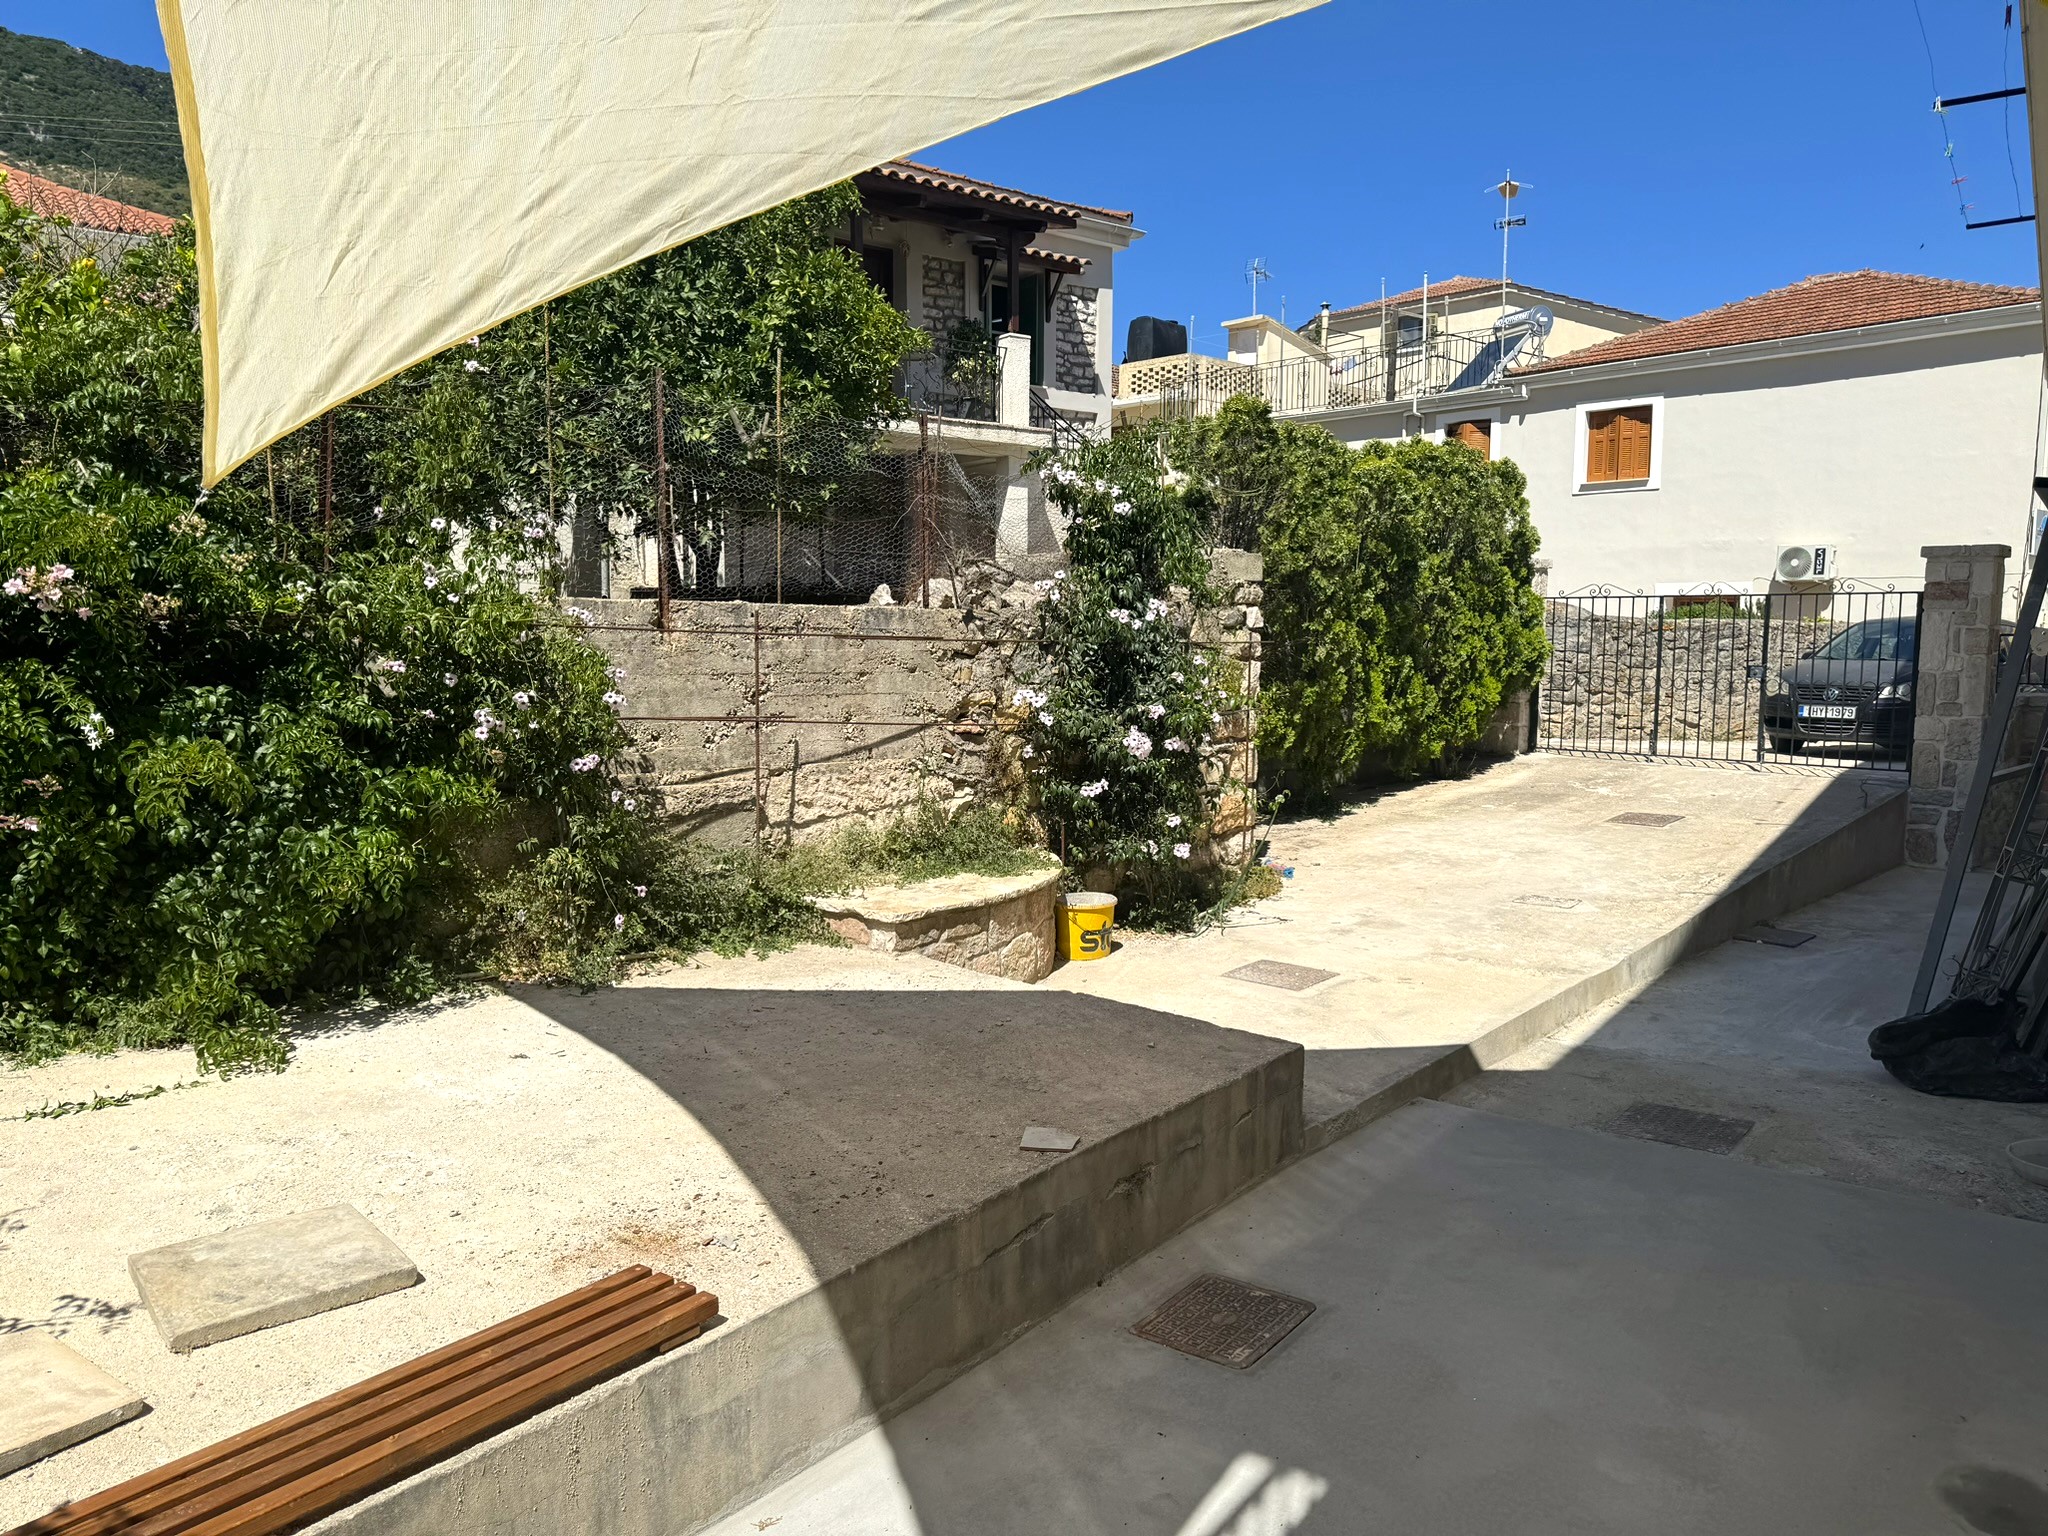 Backyard of house for sale in Ithaca Greece Vathi